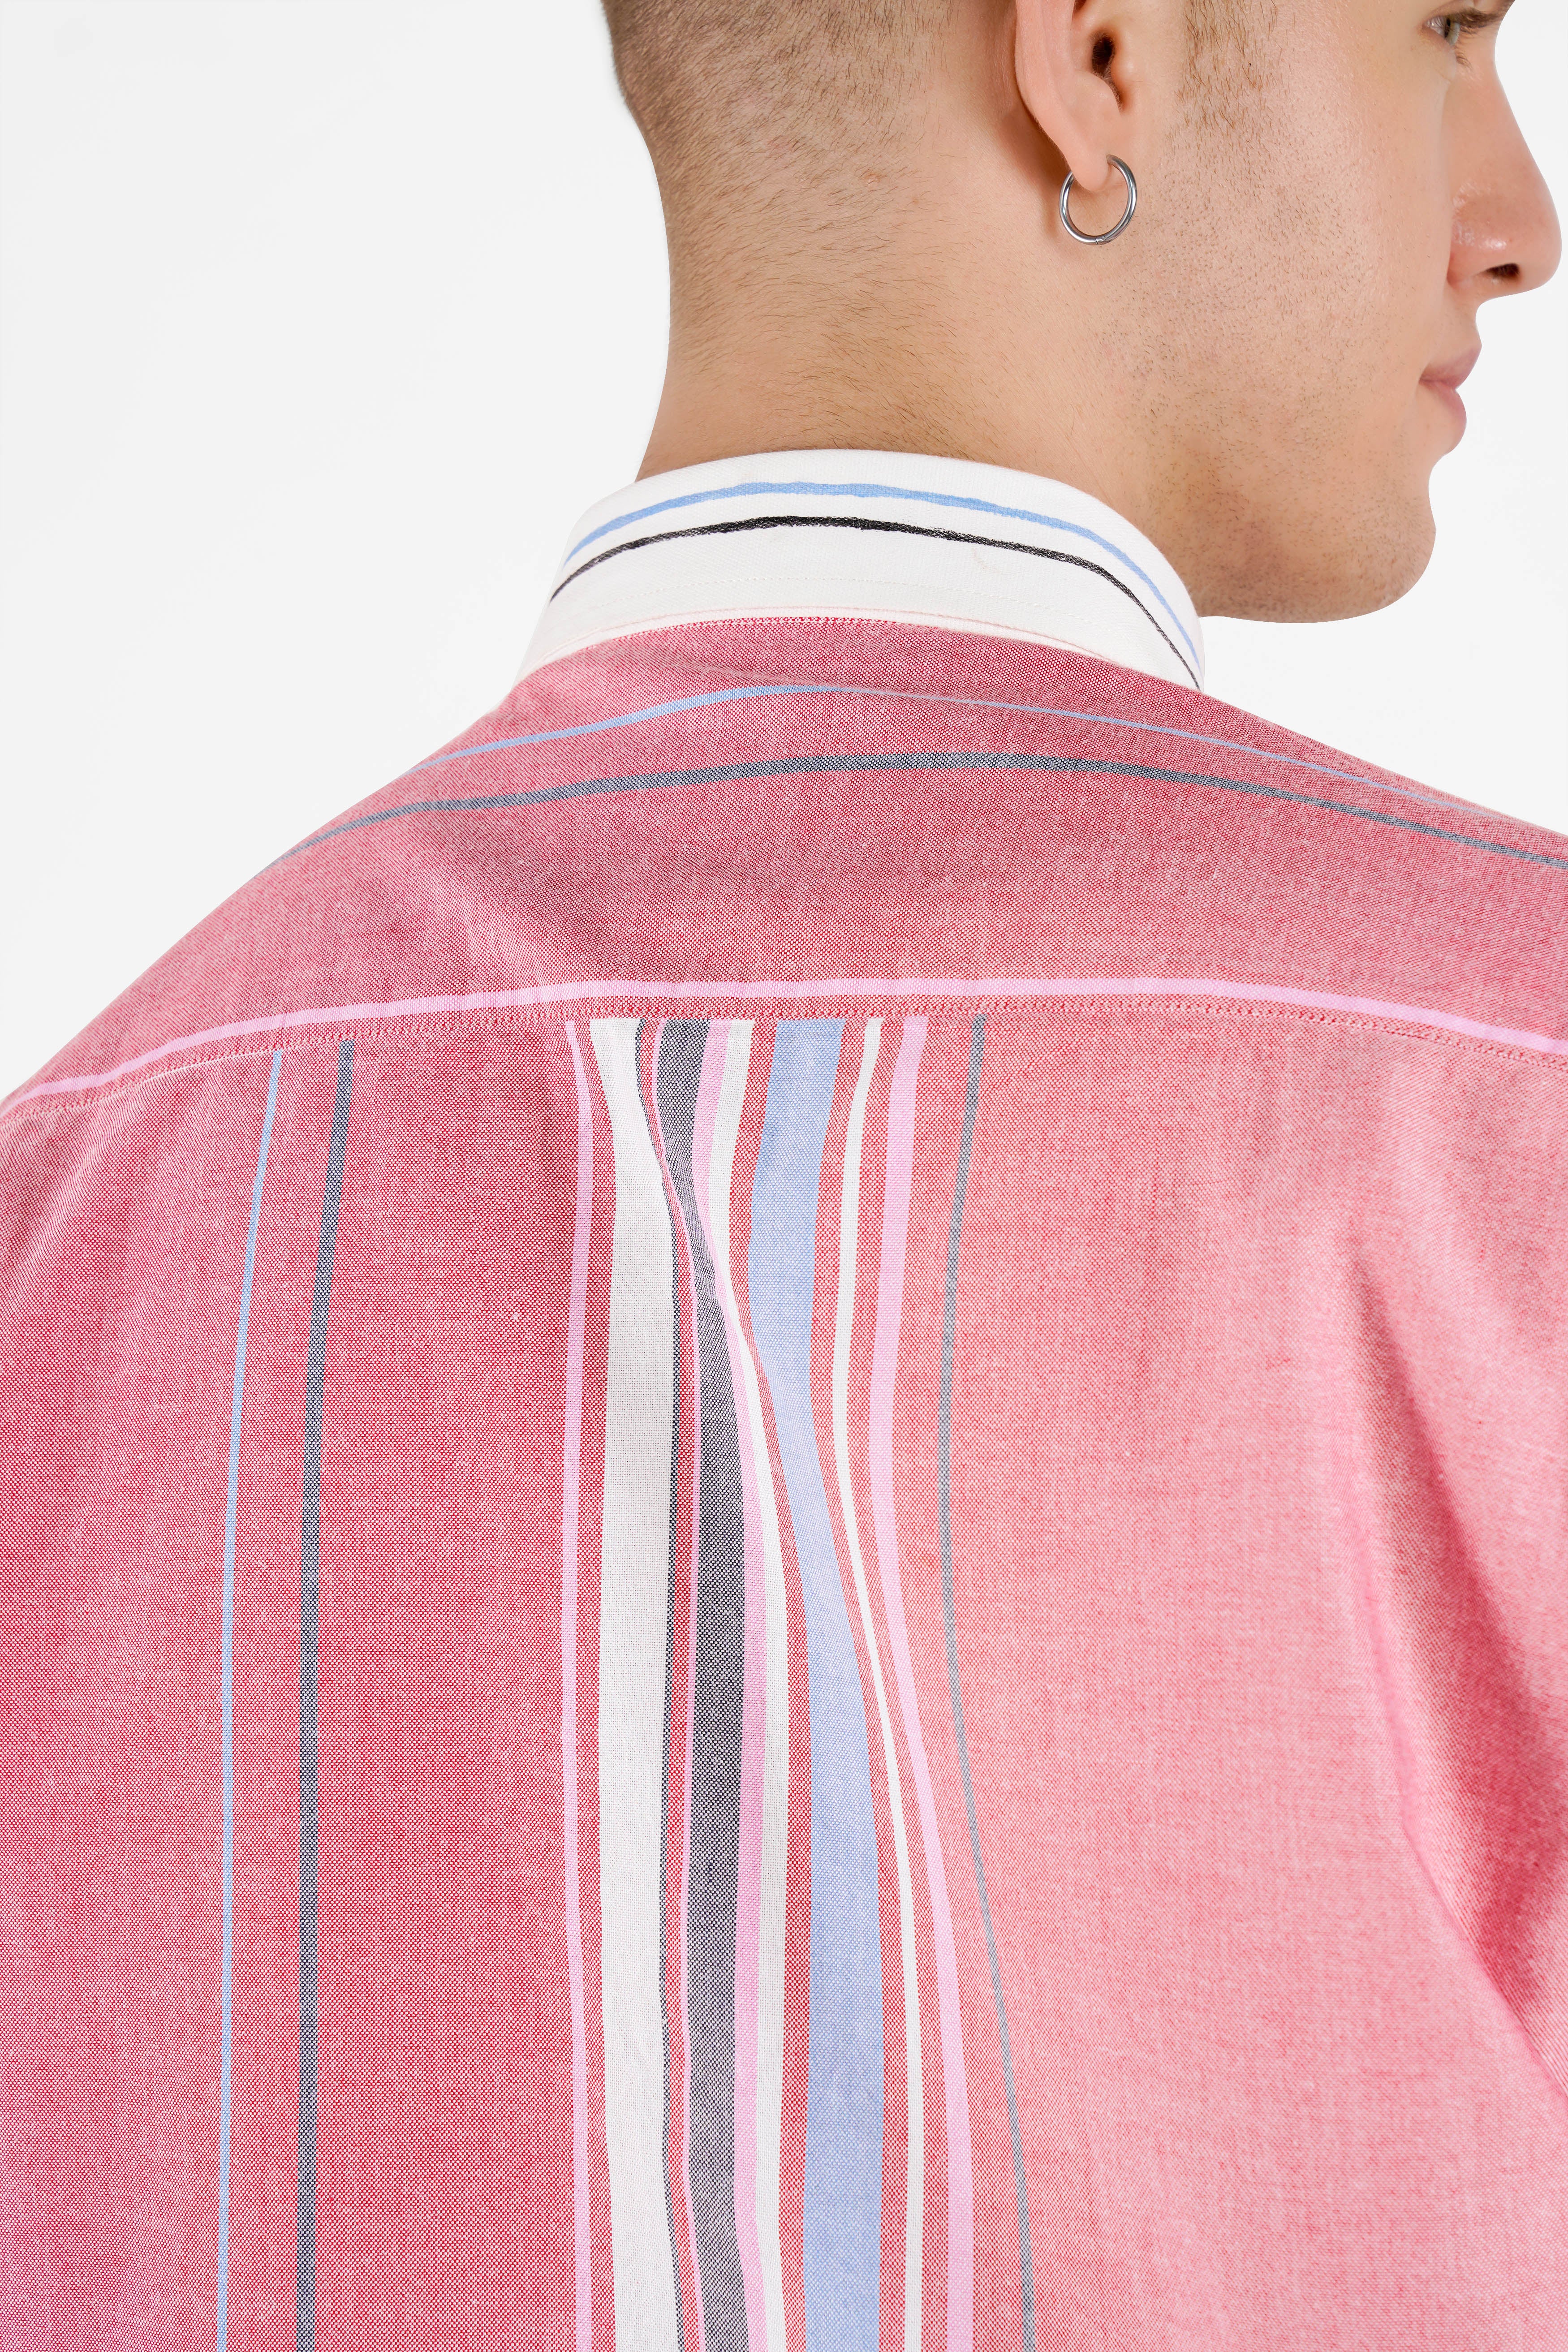 Wewak Pink Striped with Hand Painted Royal Oxford Designer Shirt